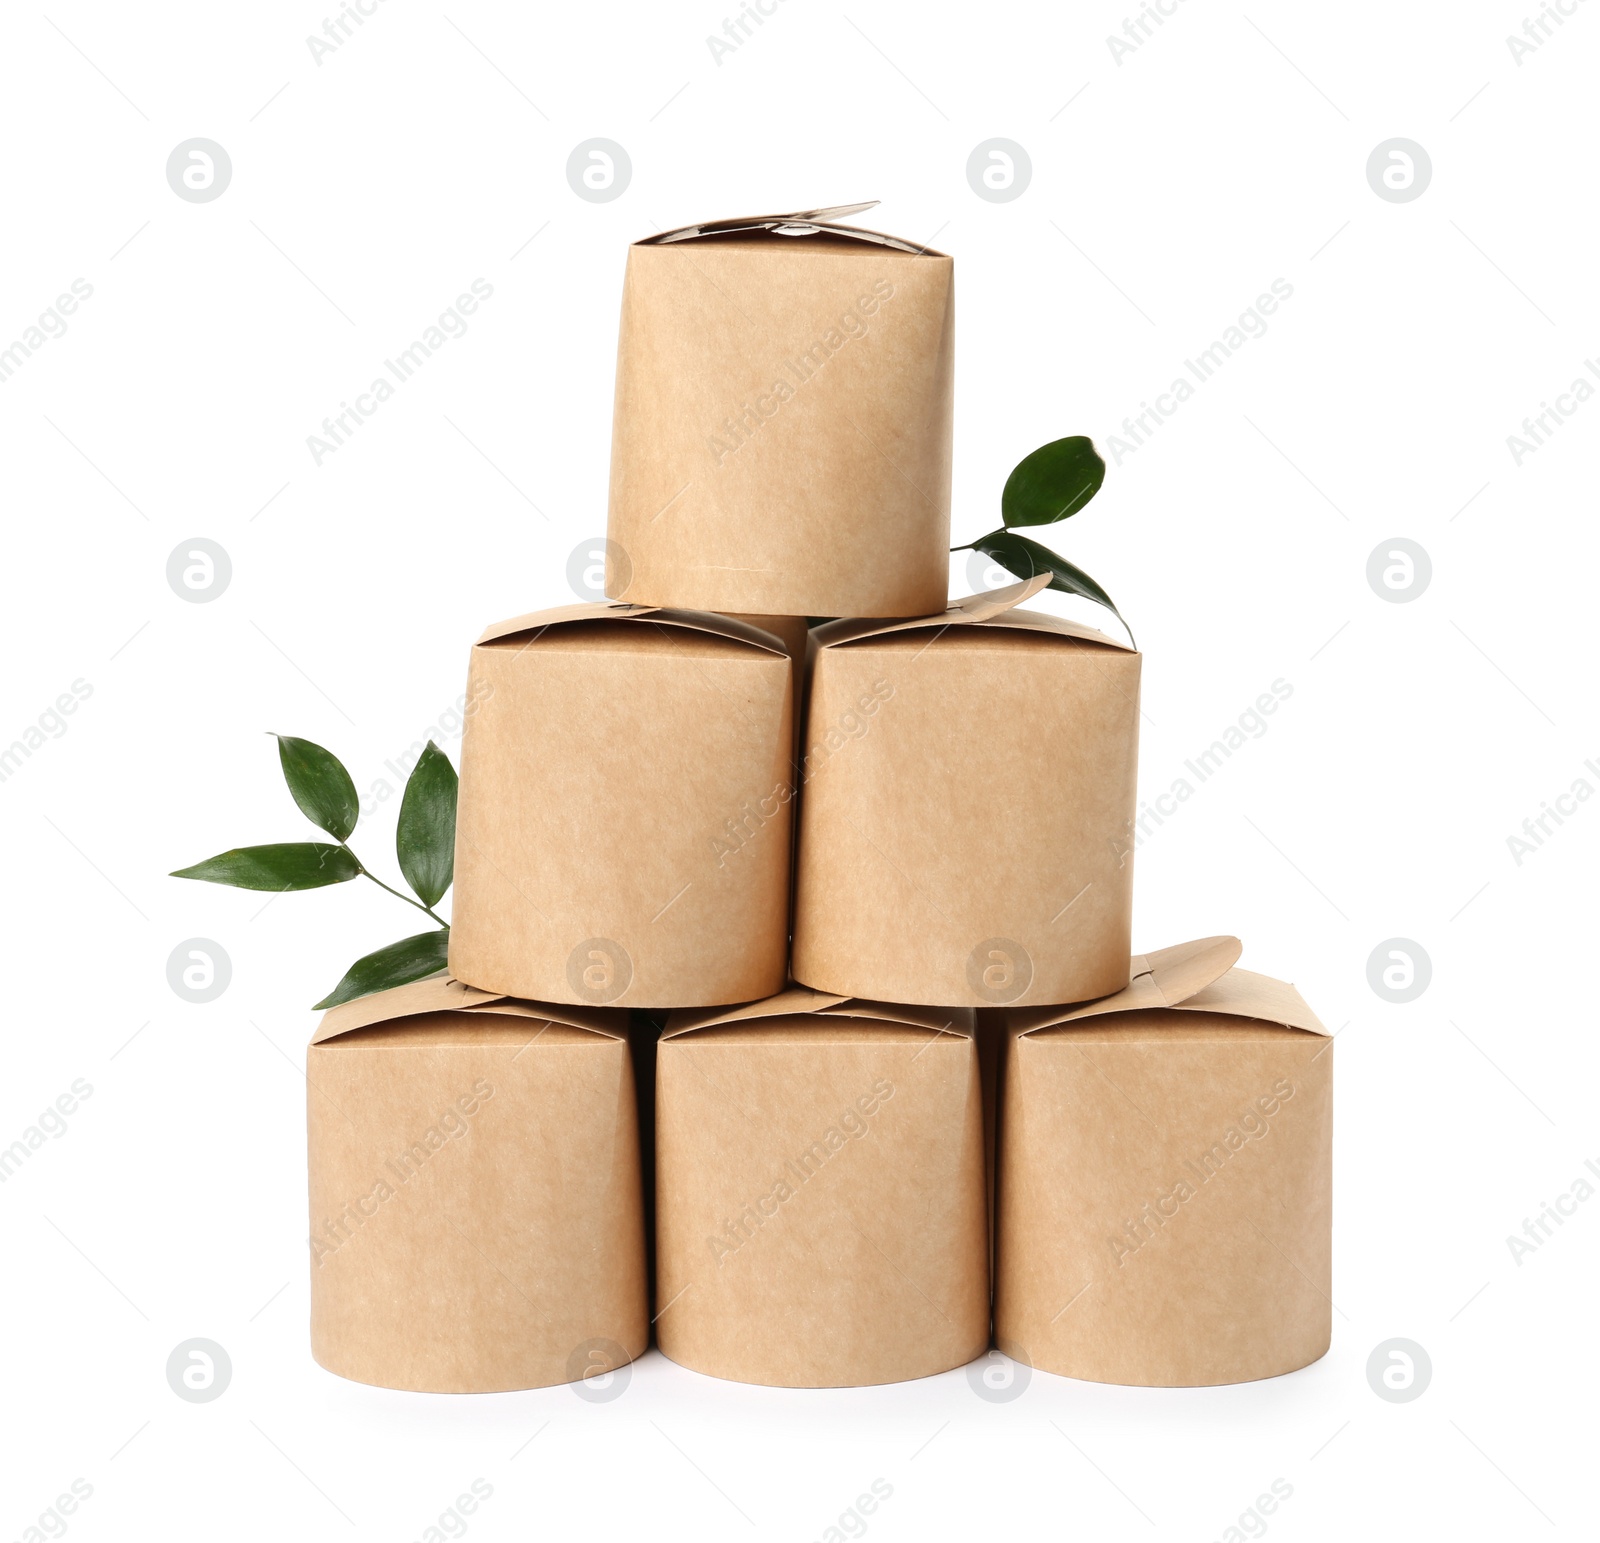 Photo of Eco friendly food containers and twigs on white background